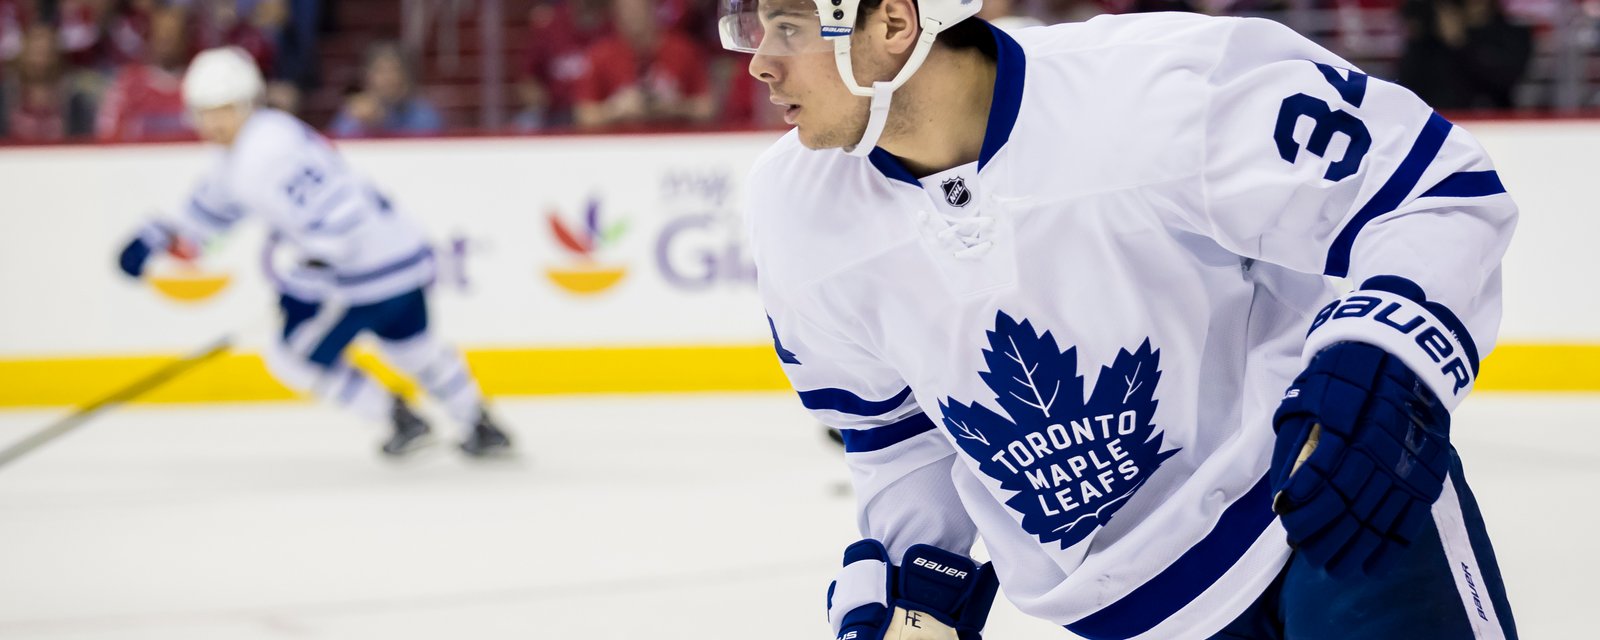 Report: Auston Matthews will sign a monster contract extension